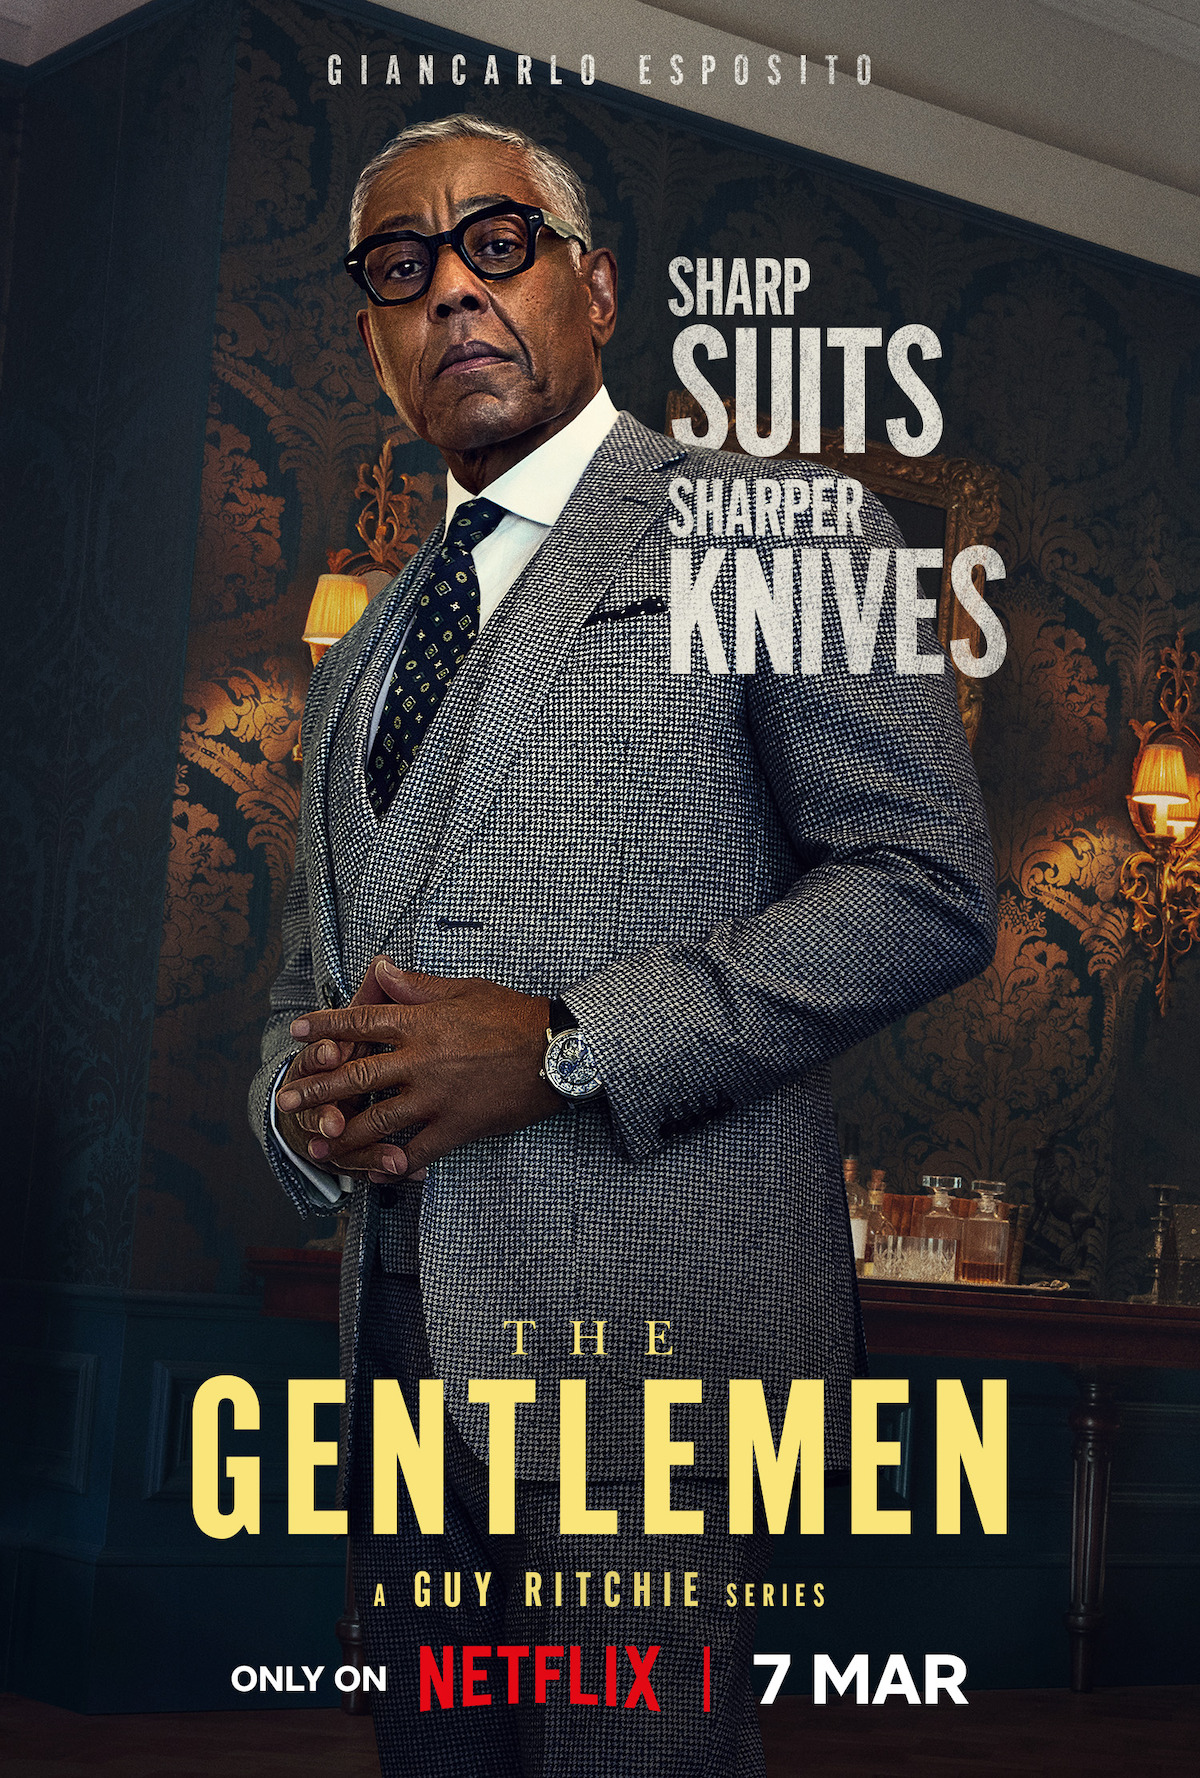 Character key art featuring Giancarlo Esposito